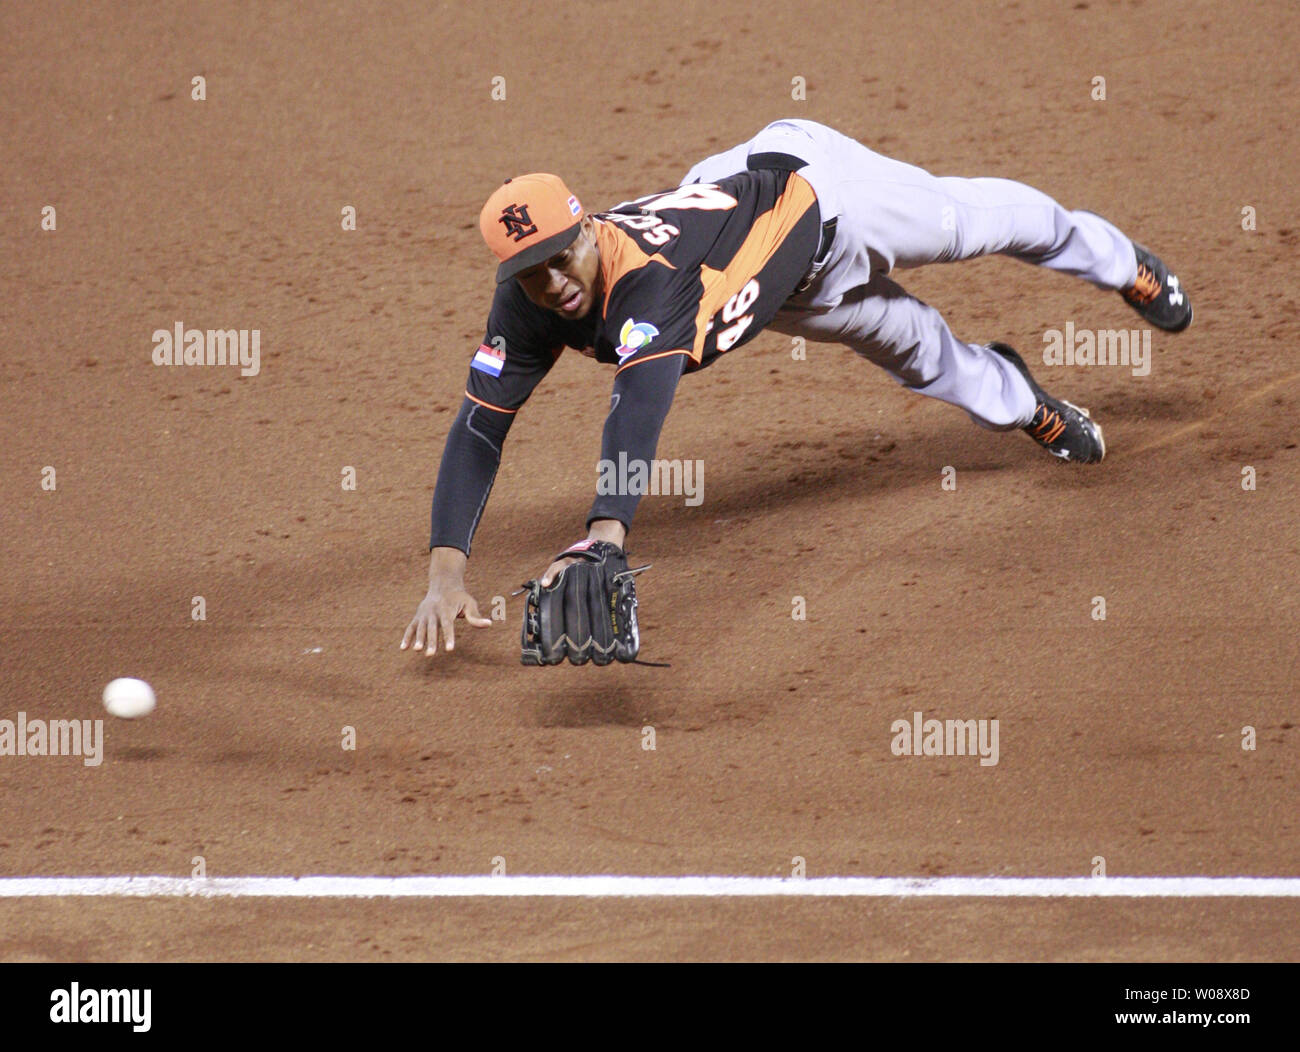 3B Jonathon Schoop of Netherlands dives and misses a double by Dominican Republic's Carlos Santana in the fifth inning of the semi finals of the World Baseball Classic at AT&T Park in San Francisco on March 18, 2013. Dominican Republic defeated Netherlands 4-1.   UPI/Bruce Gordon Stock Photo